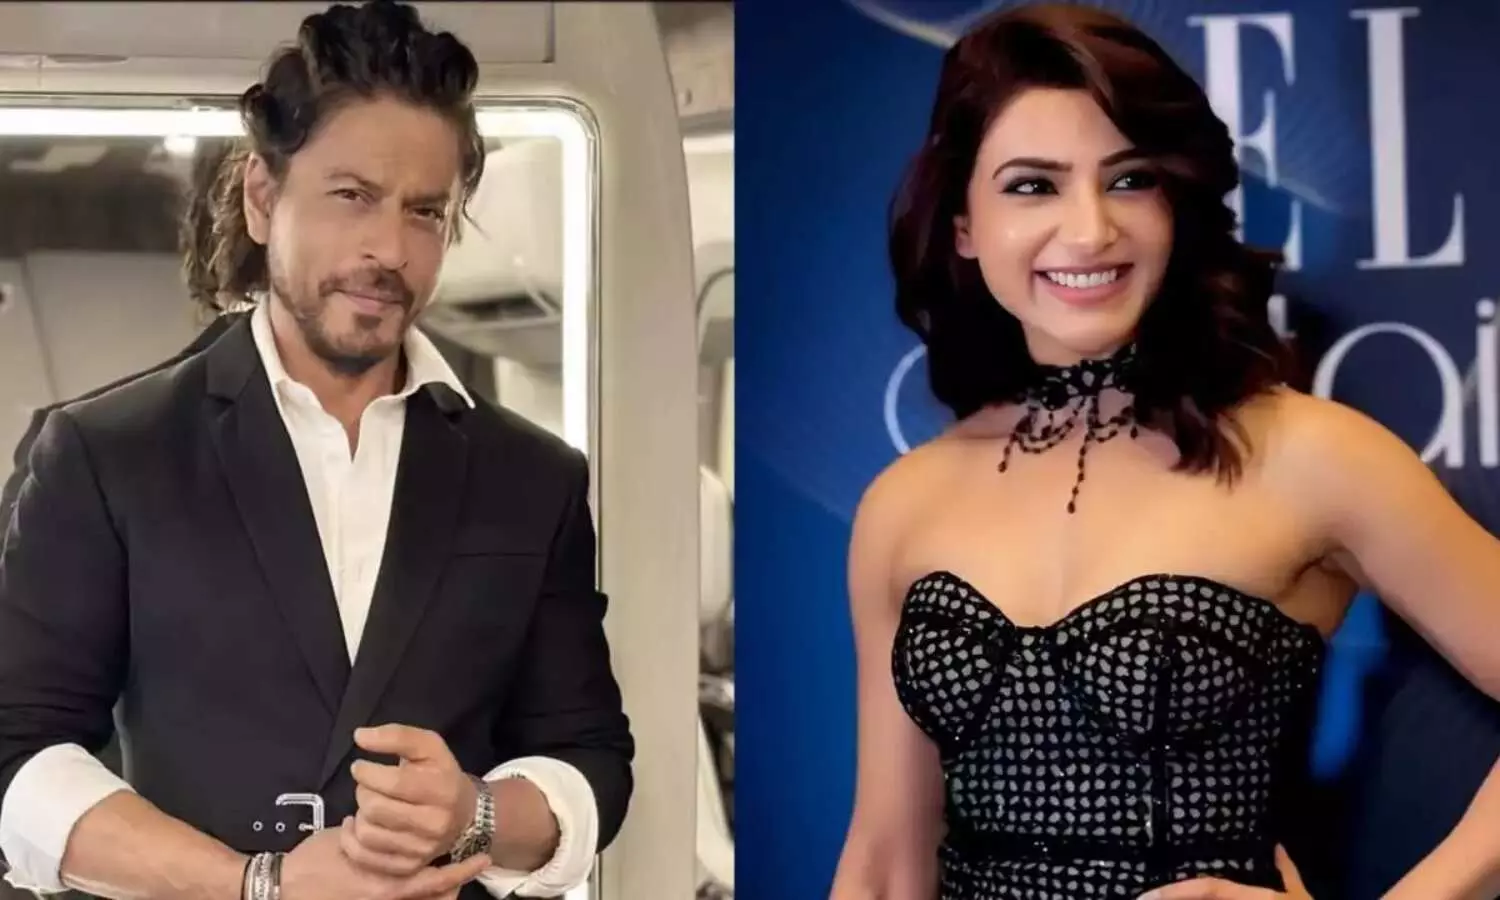 Is Shah Rukh Khan joining forces with Samantha Ruth Prabhu in a new action thriller?